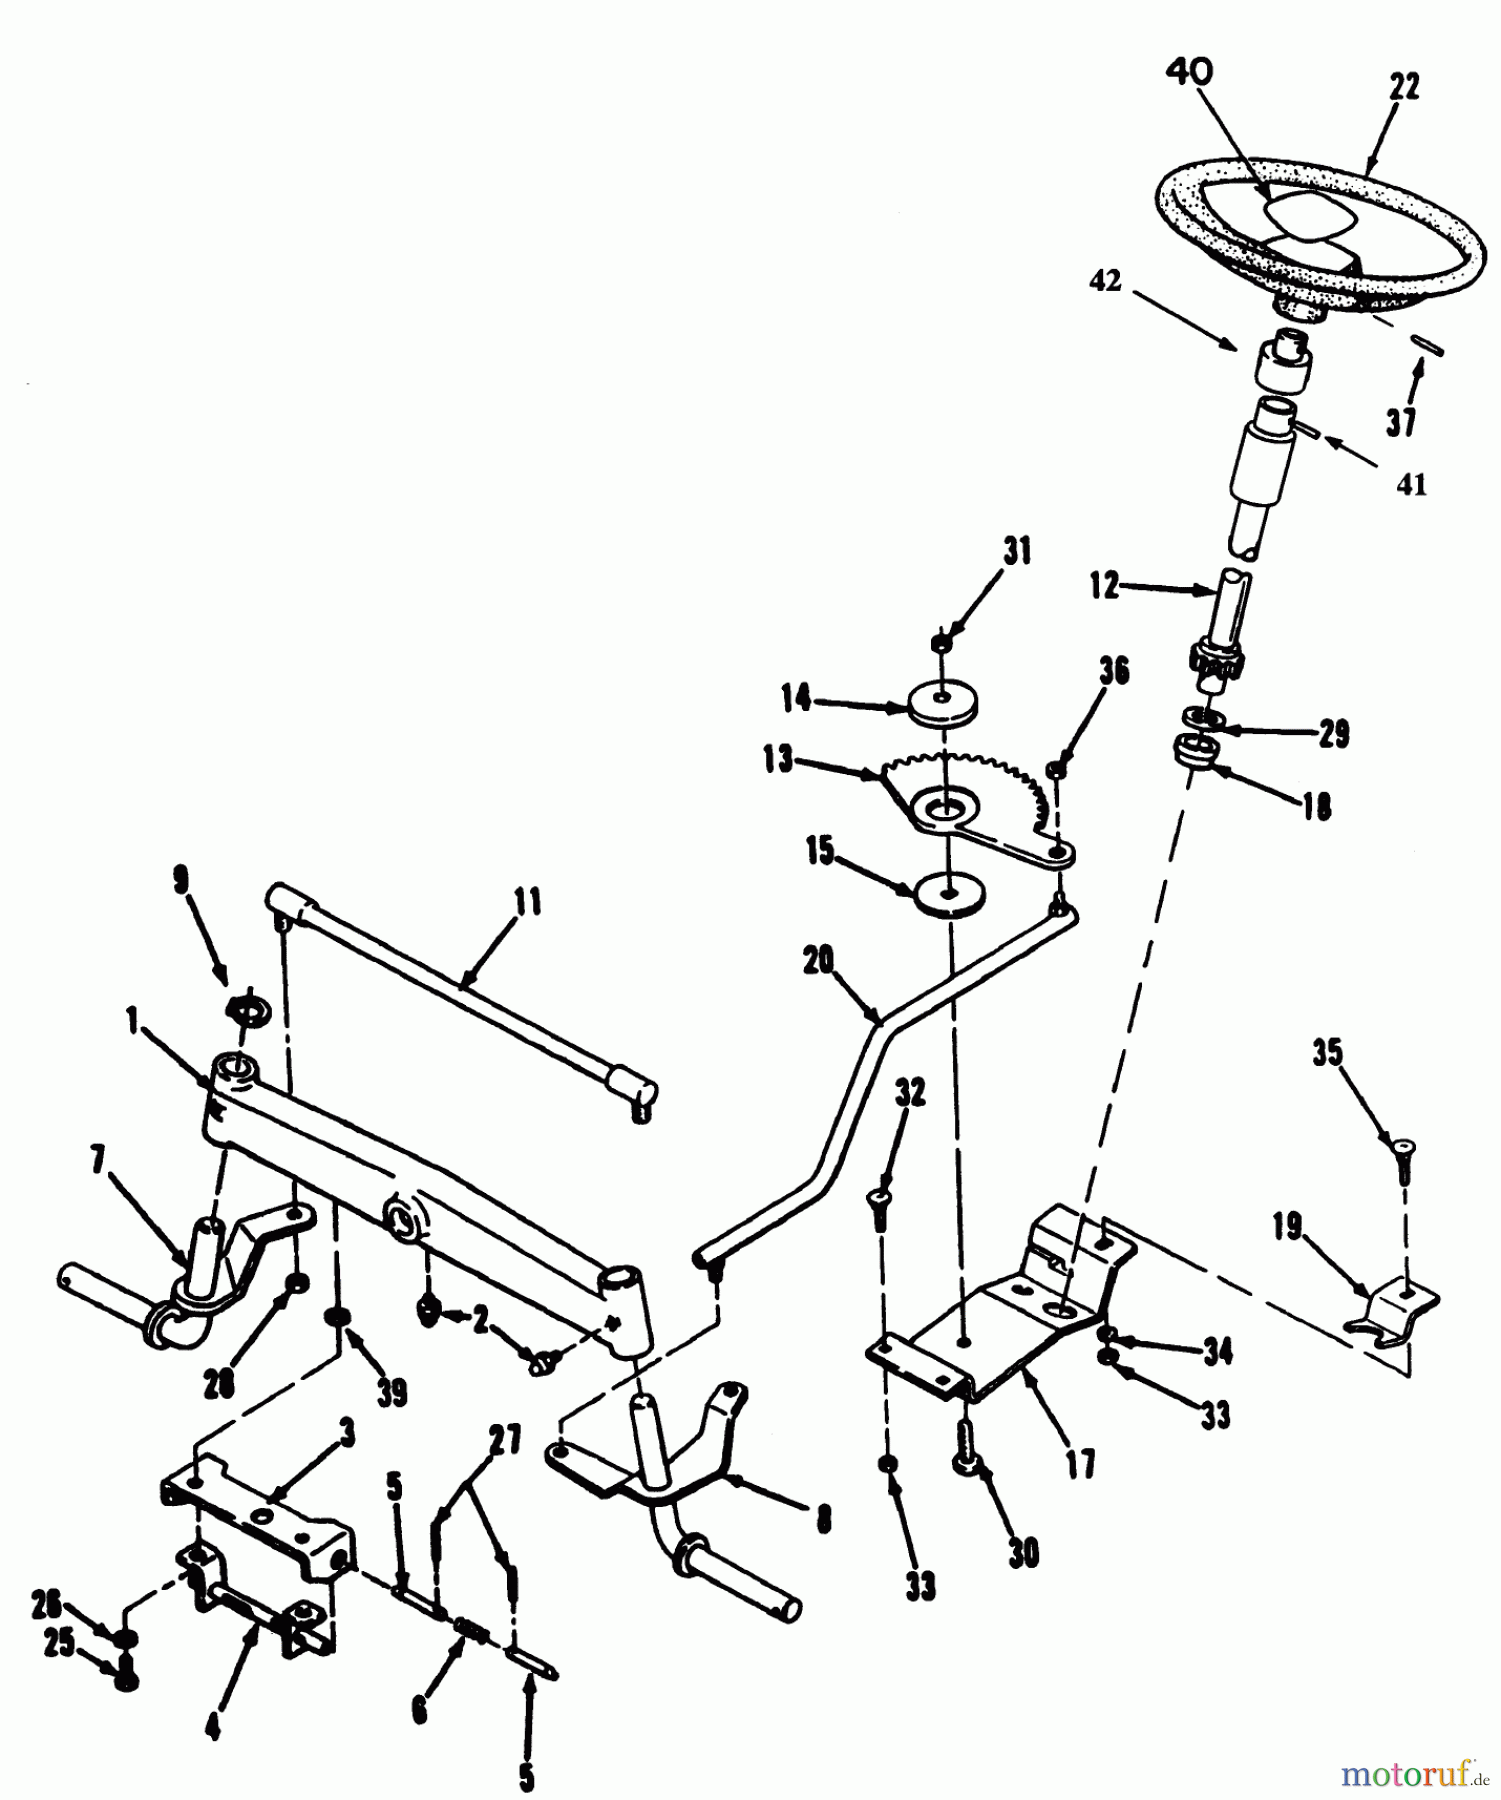  Toro Neu Mowers, Lawn & Garden Tractor Seite 1 32-12O503 (212-5) - Toro 212-5 Tractor, 1992 (2000001-2999999) FRONT AXLE & STEERING ASSEMBLY